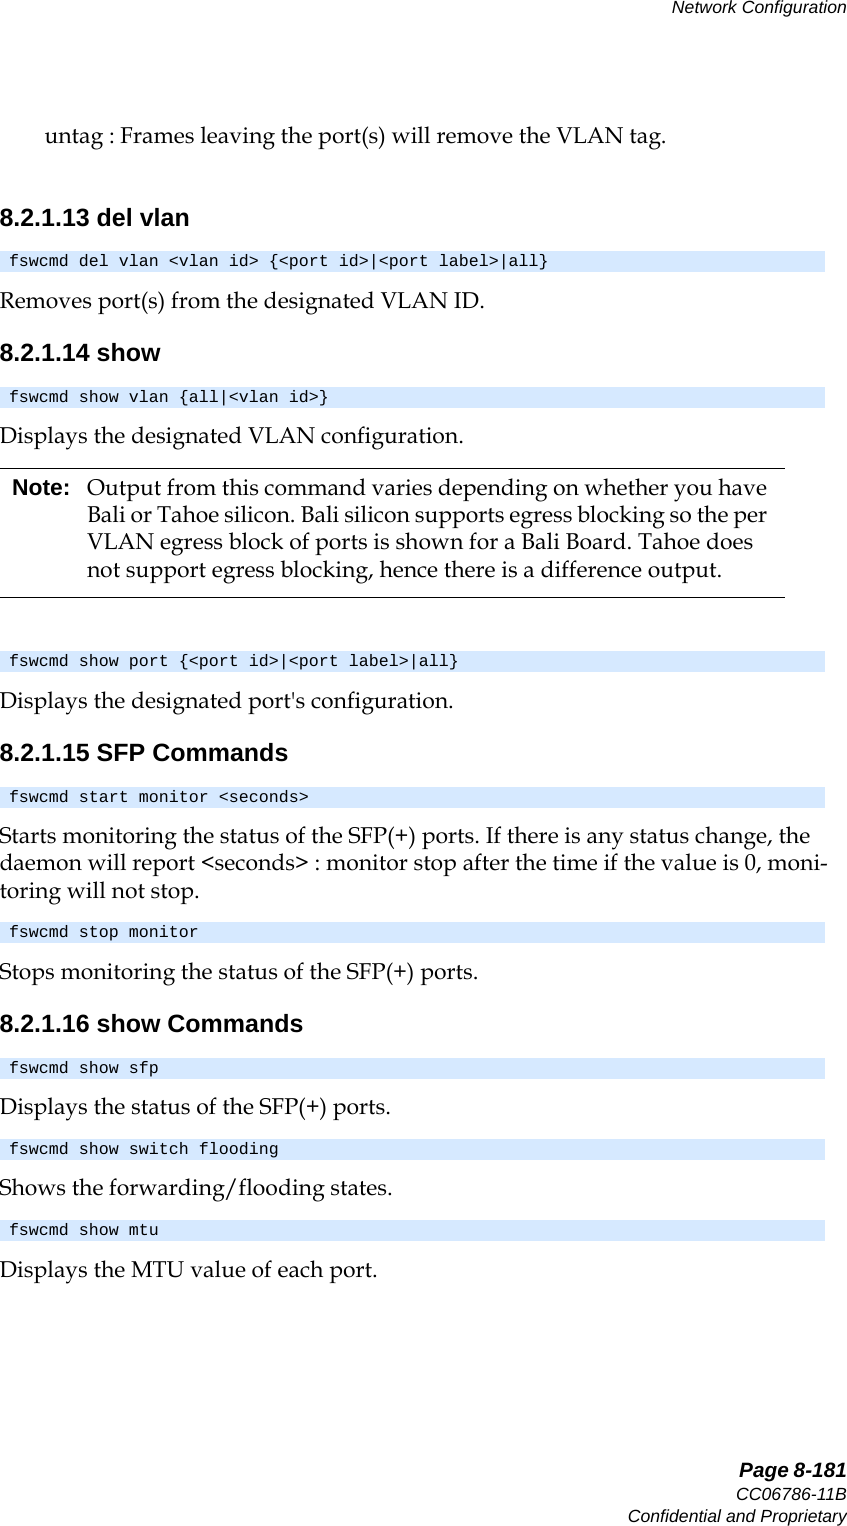   Page 8-181CC06786-11BConfidential and ProprietaryNetwork Configuration14ABABPreliminaryuntag : Frames leaving the port(s) will remove the VLAN tag.8.2.1.13 del vlanRemoves port(s) from the designated VLAN ID.8.2.1.14 showDisplays the designated VLAN configuration.  Displays the designated port&apos;s configuration.8.2.1.15 SFP CommandsStarts monitoring the status of the SFP(+) ports. If there is any status change, the daemon will report &lt;seconds&gt; : monitor stop after the time if the value is 0, moni-toring will not stop.Stops monitoring the status of the SFP(+) ports.8.2.1.16 show CommandsDisplays the status of the SFP(+) ports.Shows the forwarding/flooding states.Displays the MTU value of each port.fswcmd del vlan &lt;vlan id&gt; {&lt;port id&gt;|&lt;port label&gt;|all}fswcmd show vlan {all|&lt;vlan id&gt;}Note: Output from this command varies depending on whether you have Bali or Tahoe silicon. Bali silicon supports egress blocking so the per VLAN egress block of ports is shown for a Bali Board. Tahoe does not support egress blocking, hence there is a difference output.fswcmd show port {&lt;port id&gt;|&lt;port label&gt;|all}fswcmd start monitor &lt;seconds&gt;fswcmd stop monitorfswcmd show sfpfswcmd show switch floodingfswcmd show mtu